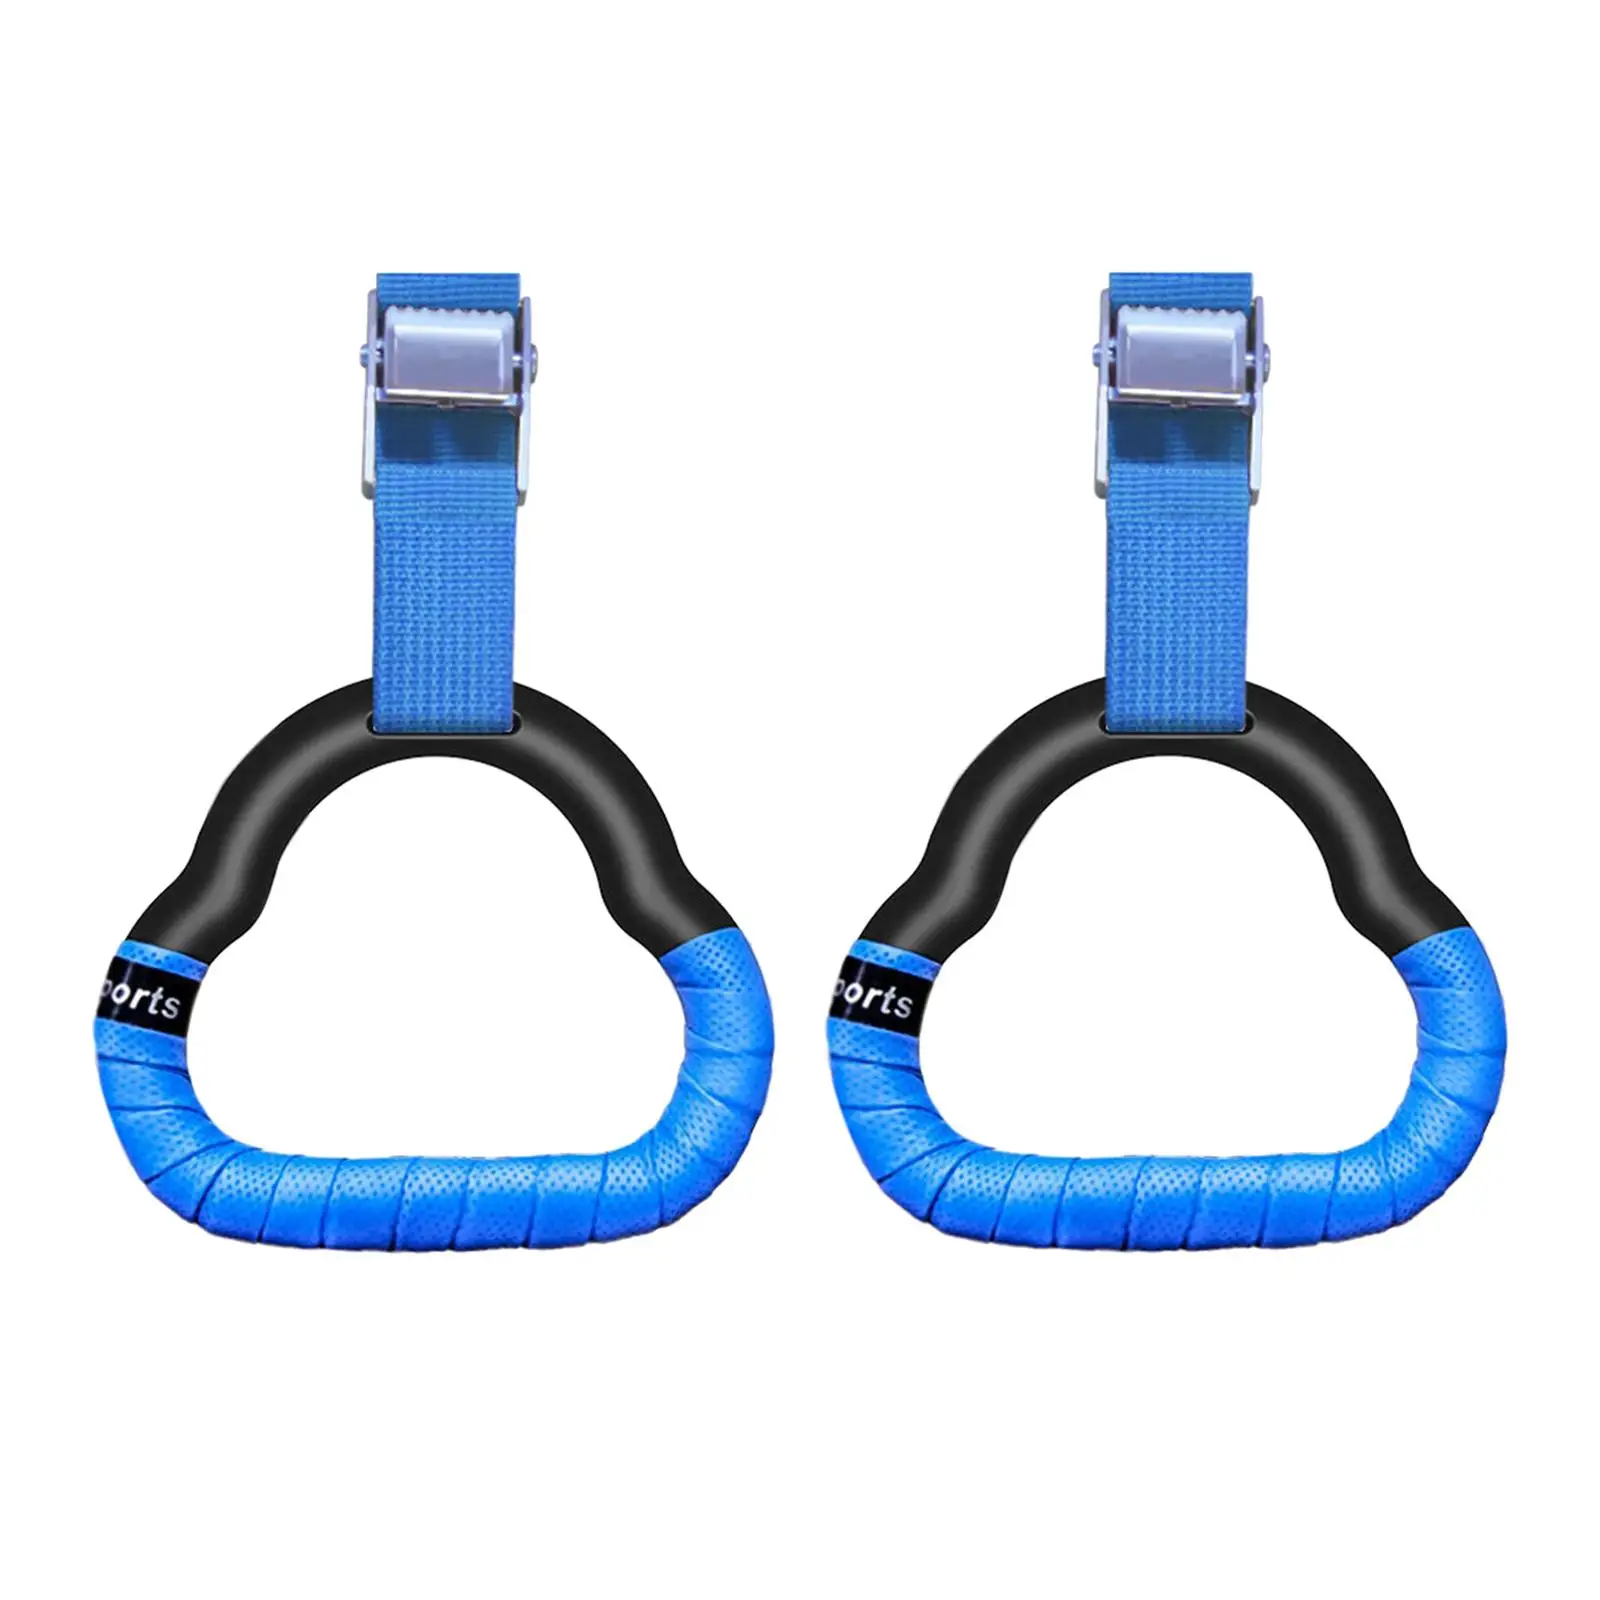 Gymnastics Rings Non Slip Adjustable Training Rings Children Training Gym Ring Exercise Rings for Full Body Workout Home Gym